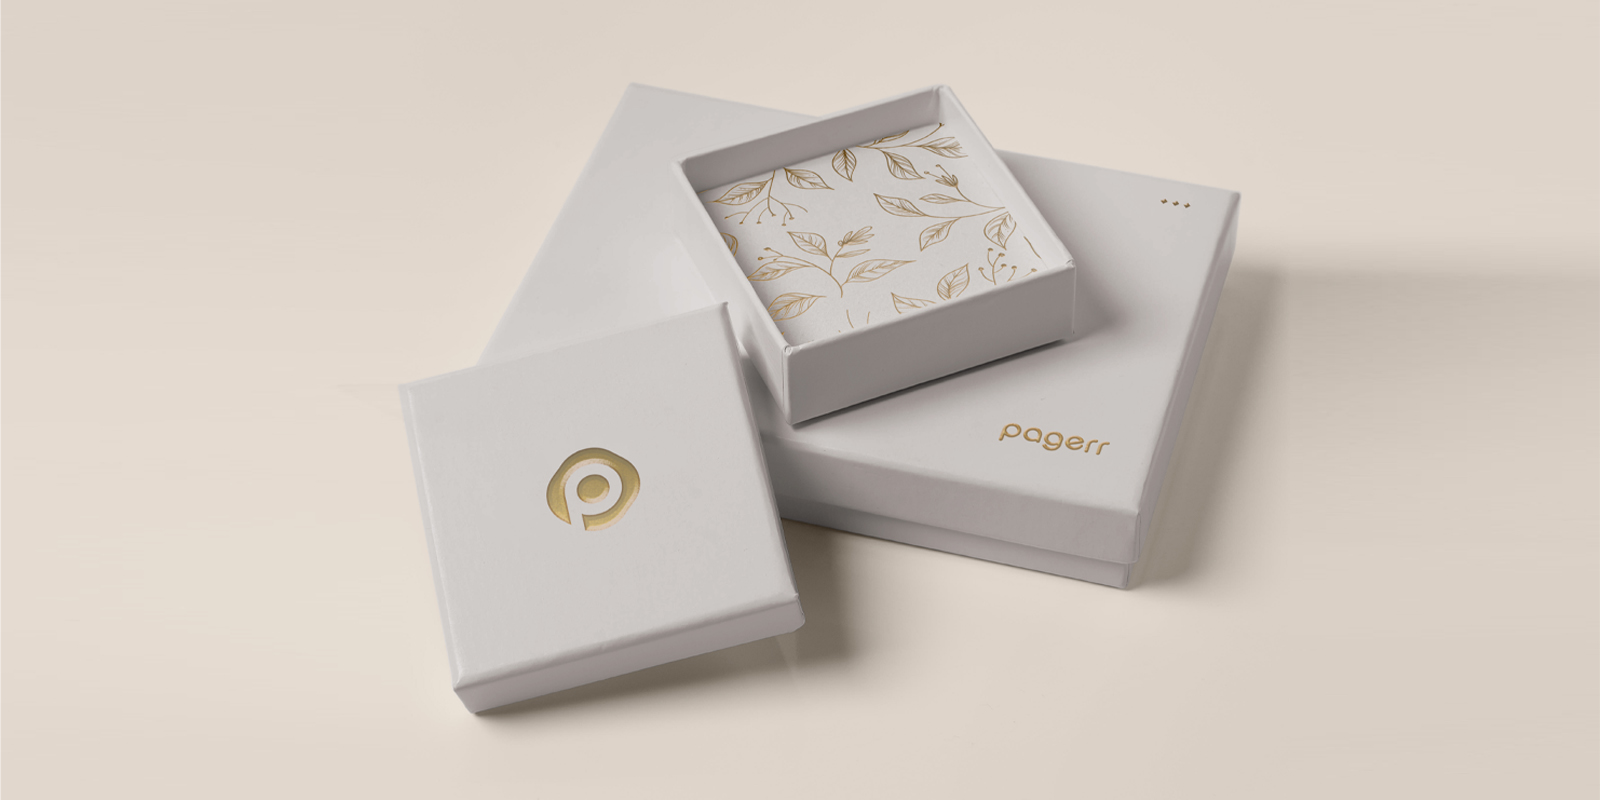 Product boxes in Geelong - Print with Pagerr